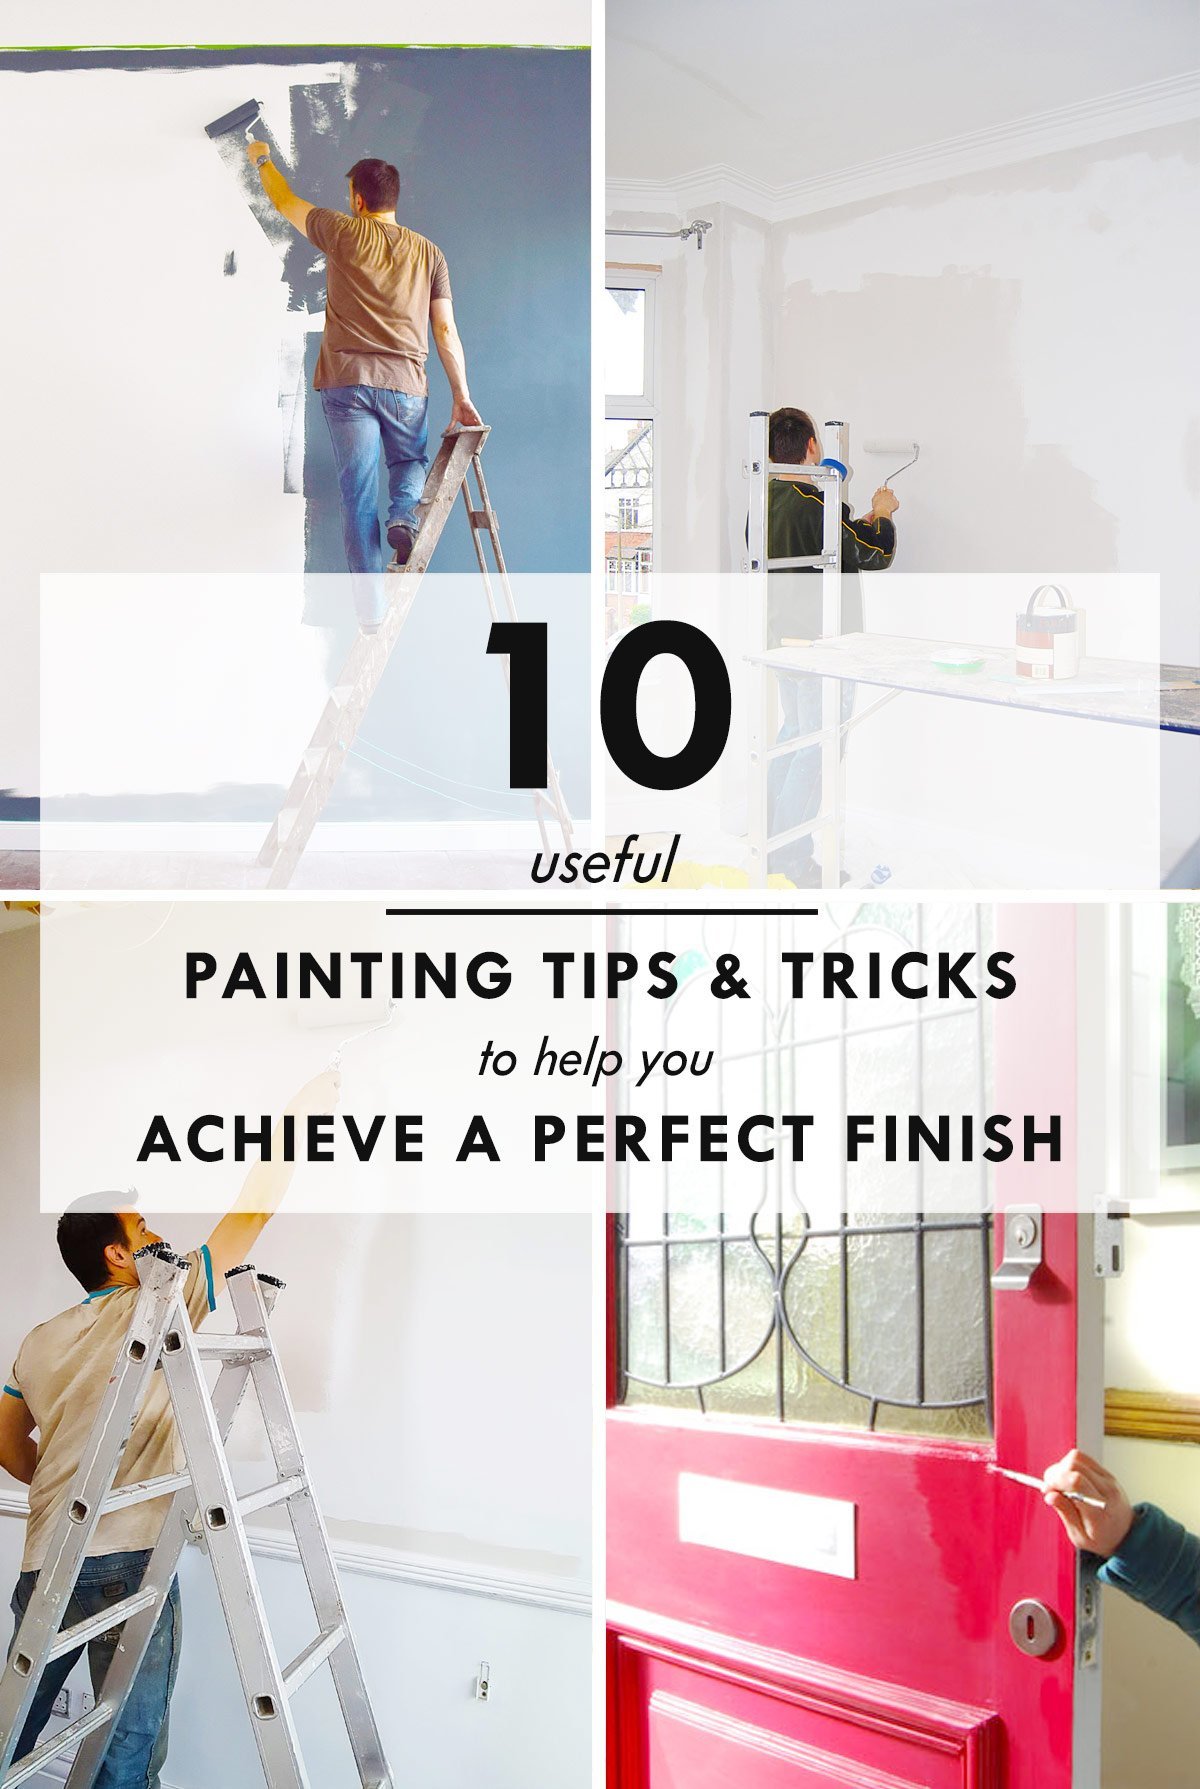 House-Painting Tips for a Perfect Finish